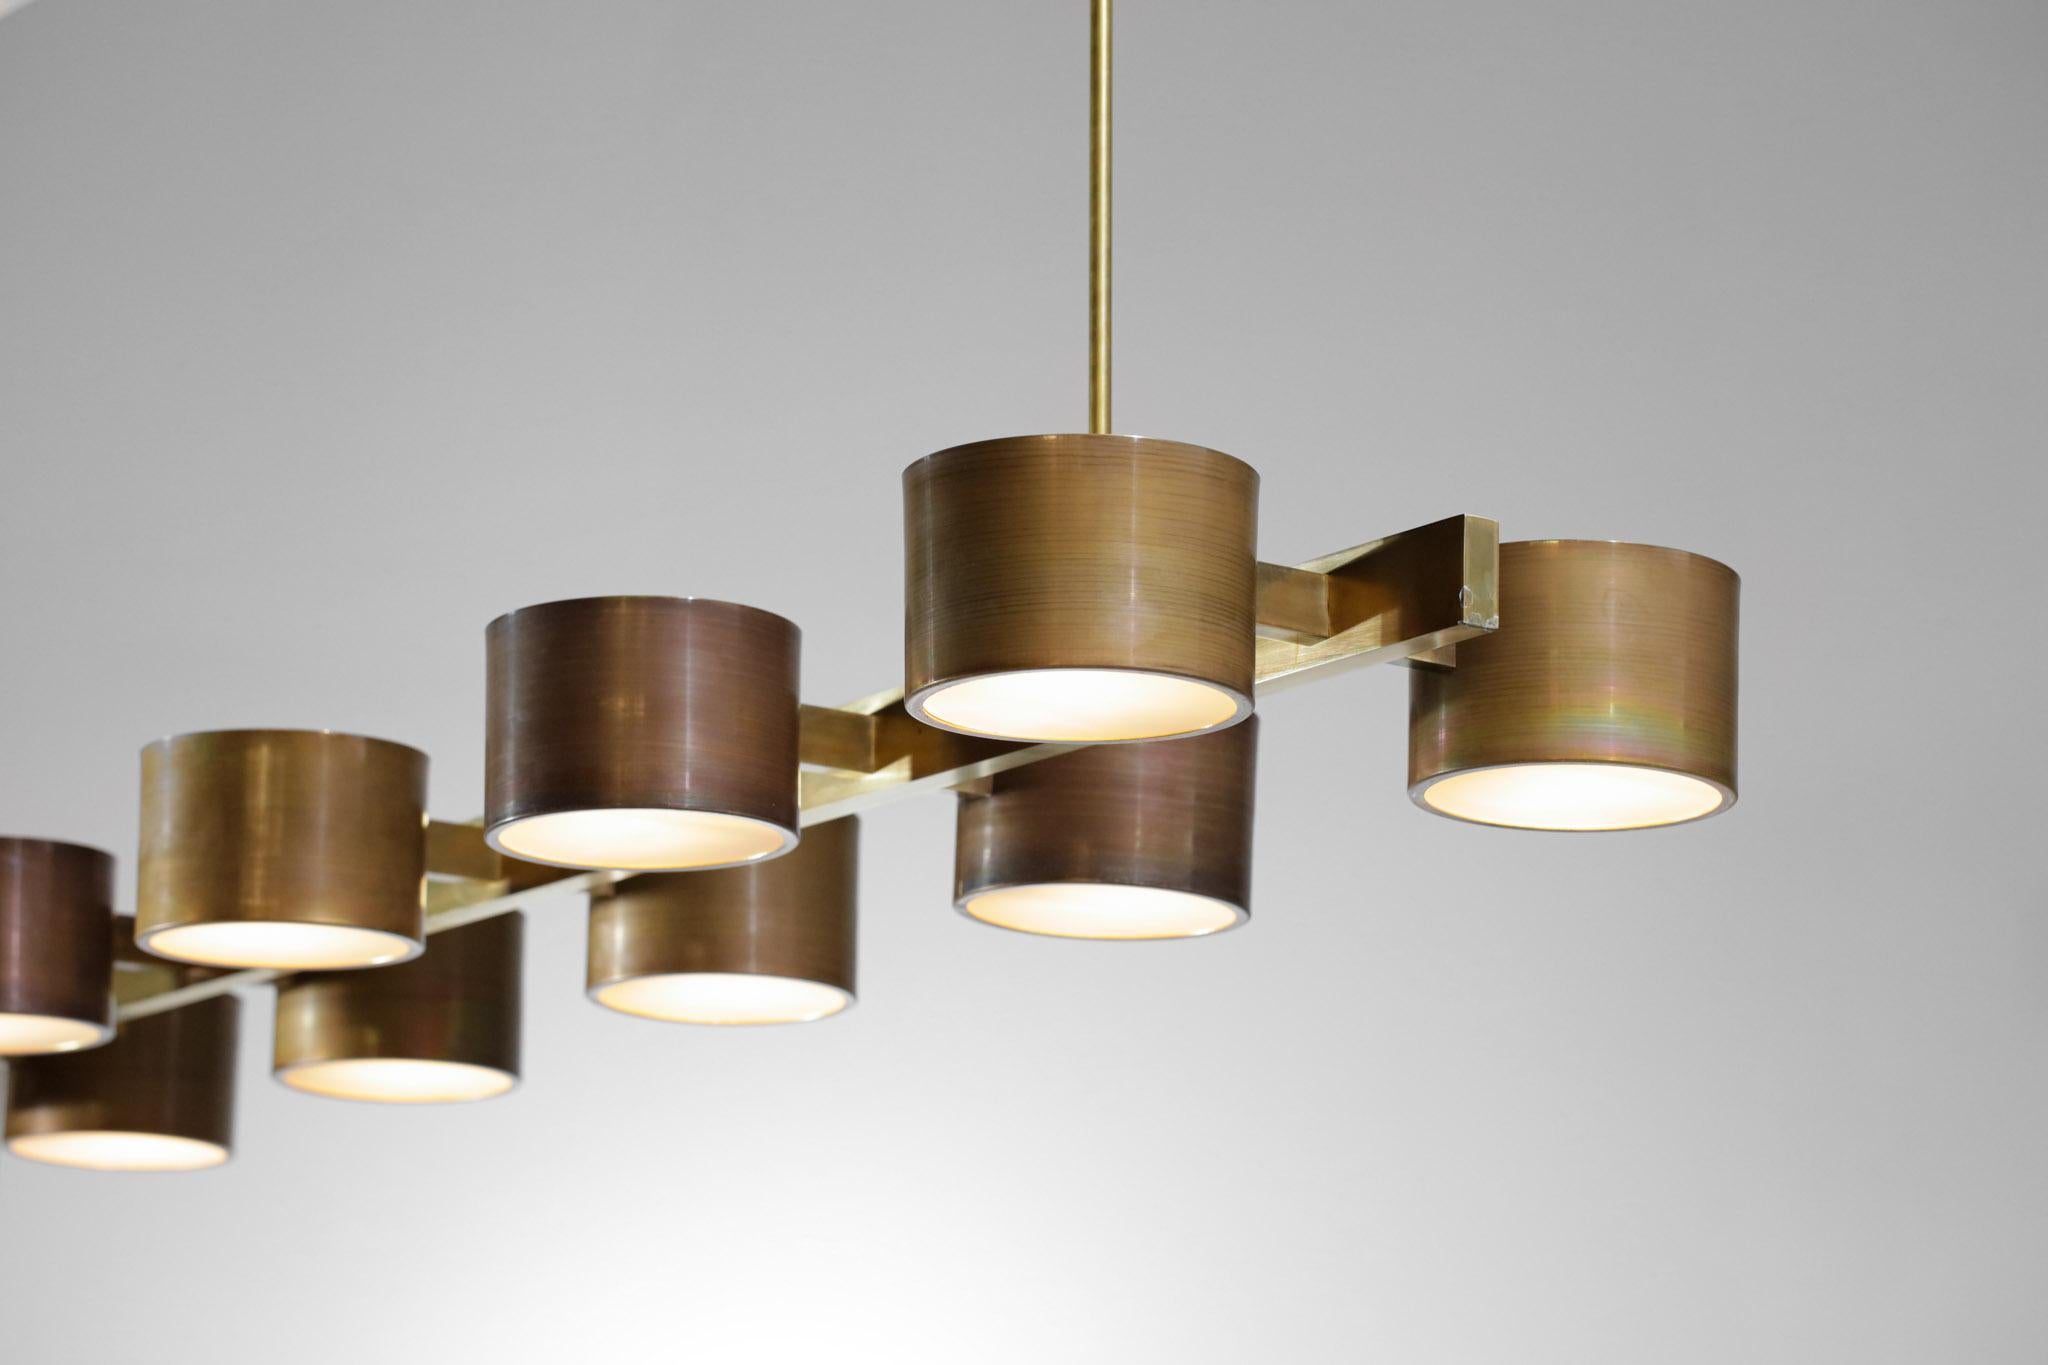 Large Chandelier 12 shades in the Style of Hans Agne Jakobsson 